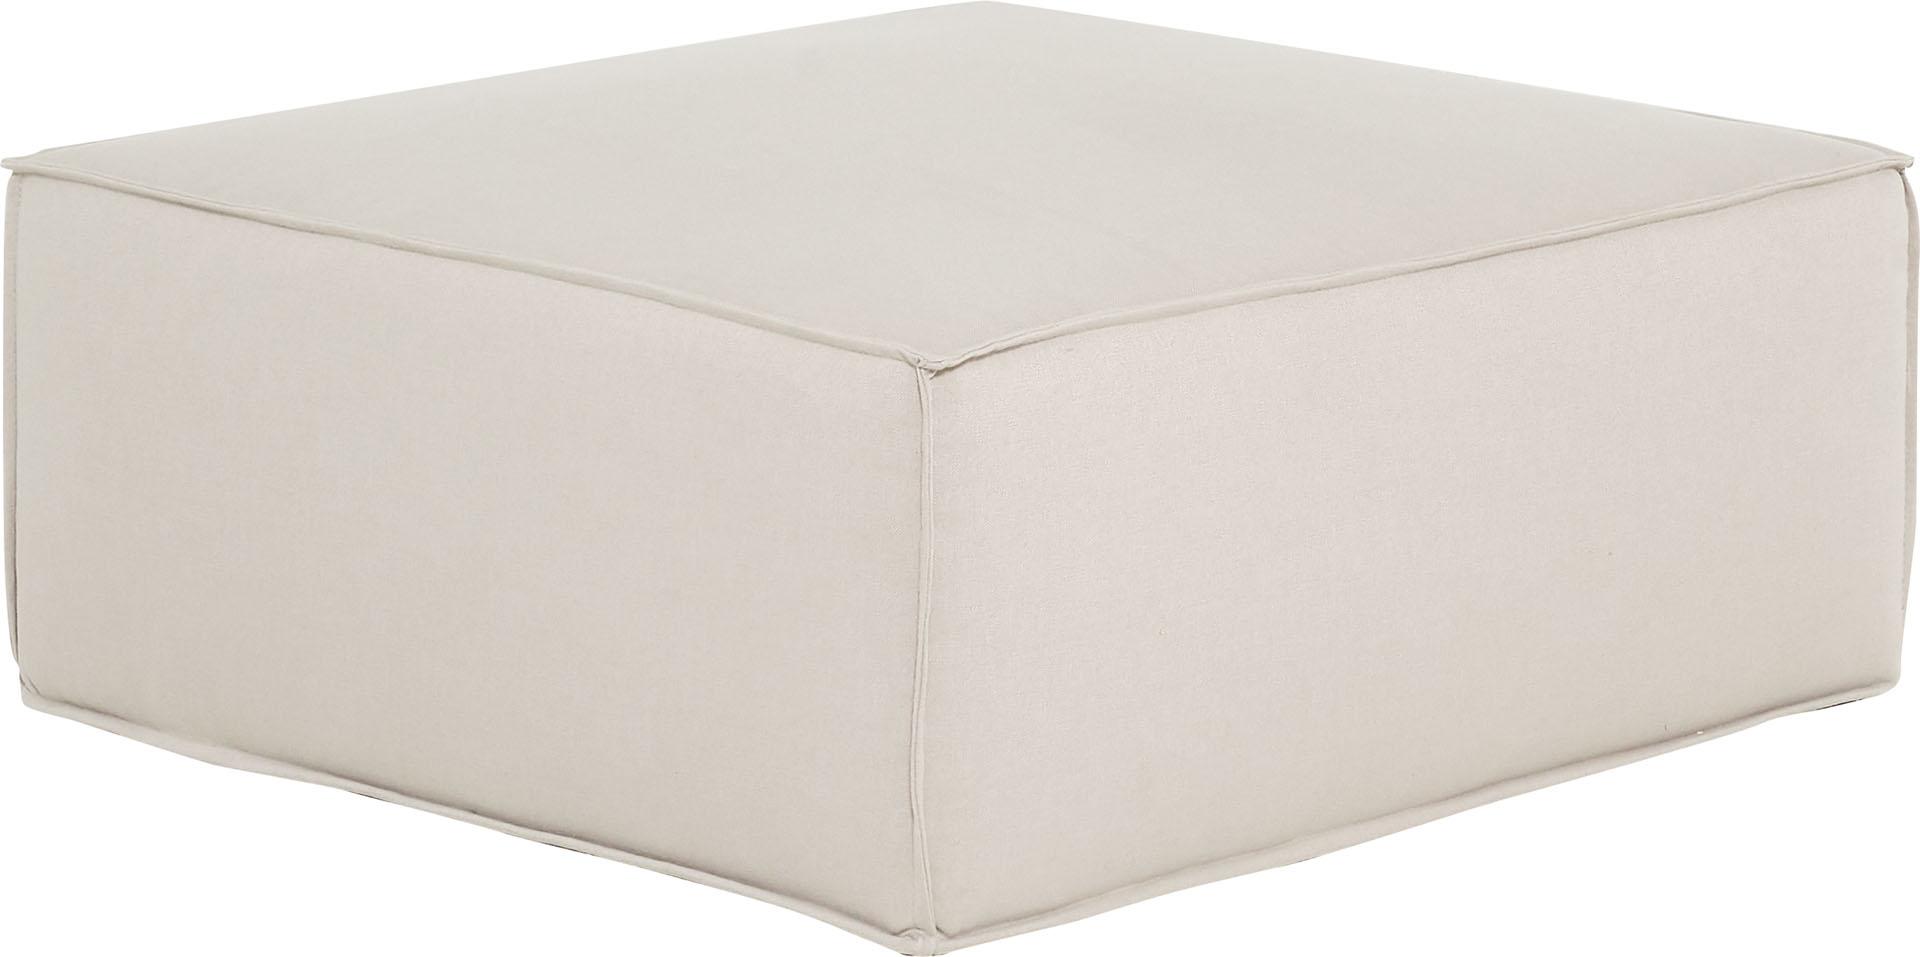 Chill pouffe with removable cover